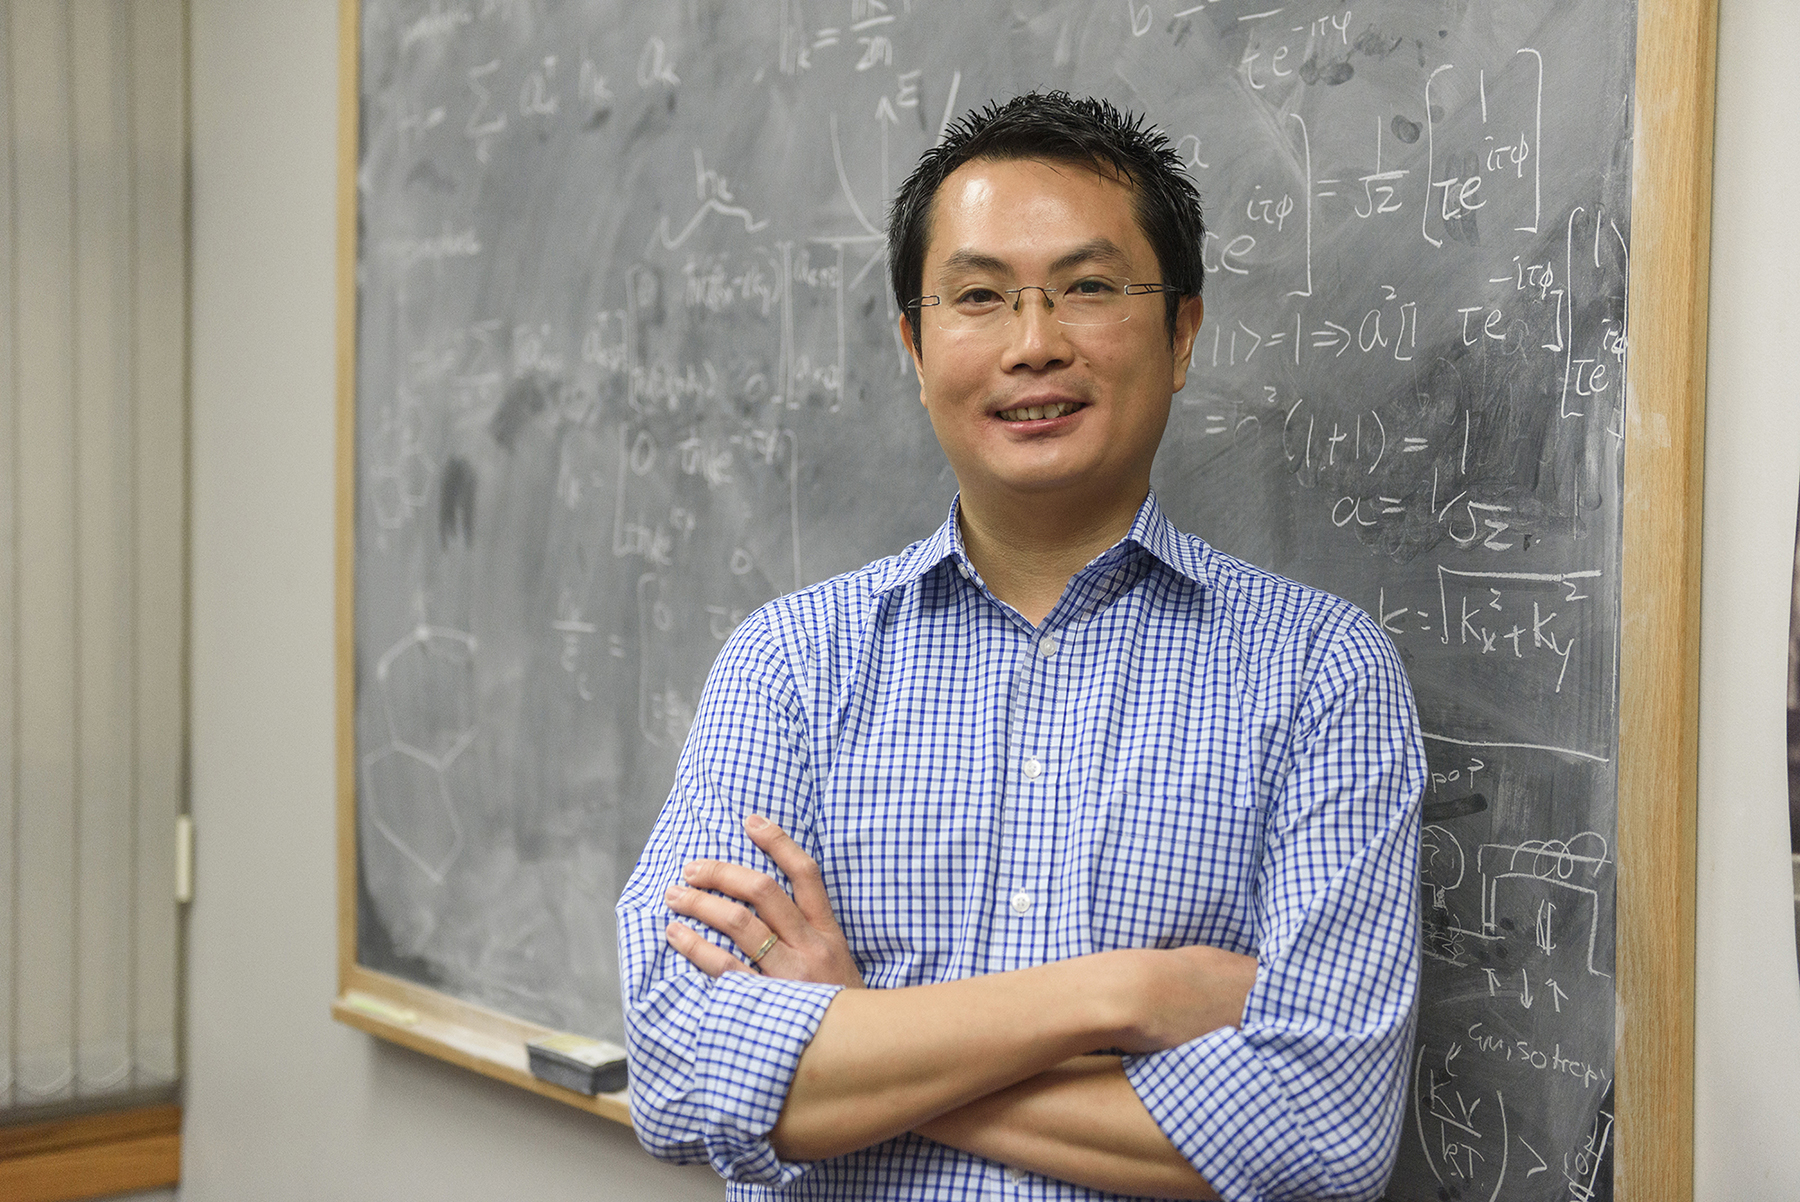 With Project, Physics Professor ‘Pushing the Limit of Our Understanding’